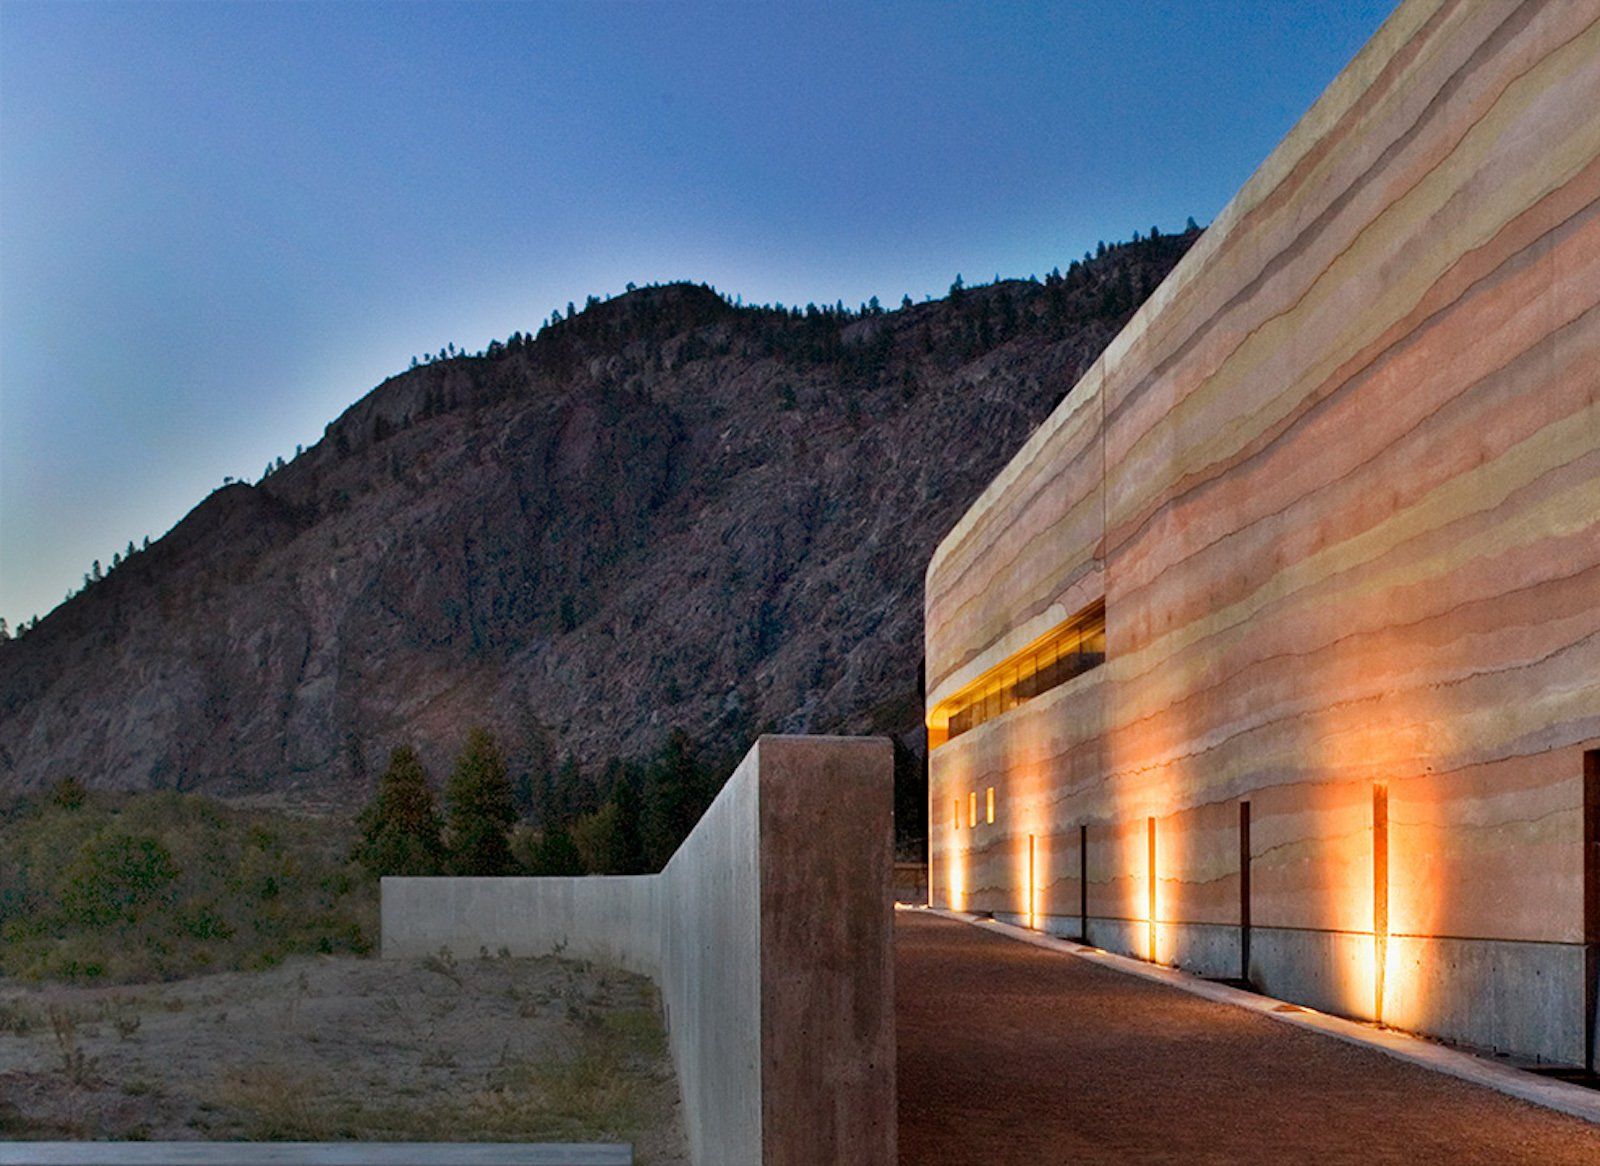 nk mip wall  at dusk with lights going up the rammed earth SIREWALL, desert hill in background